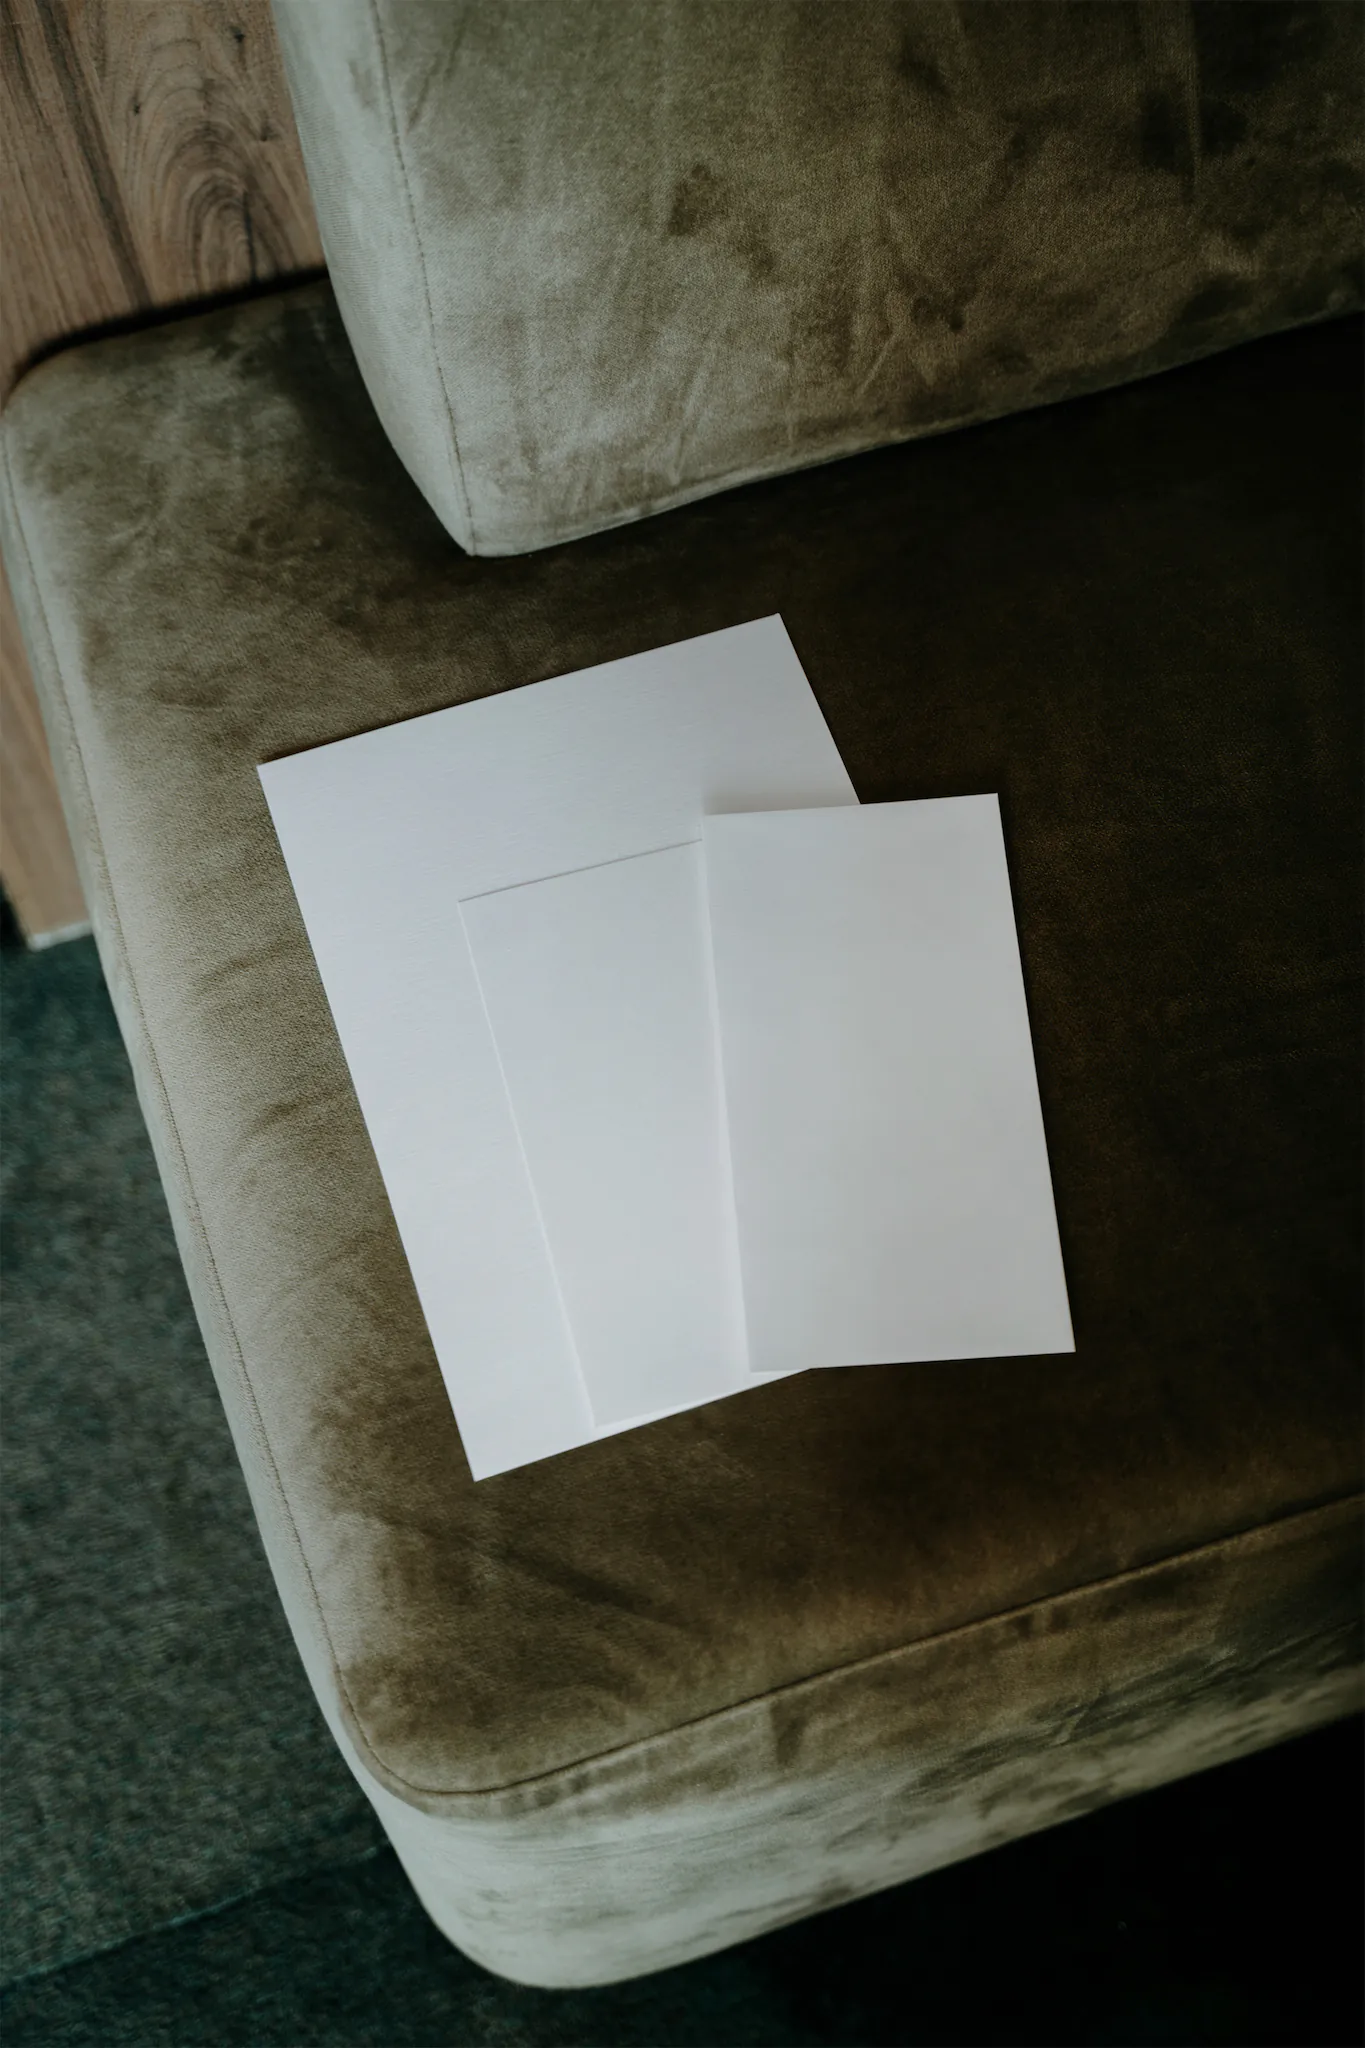 Set of stationery mockup over a fancy green sofa